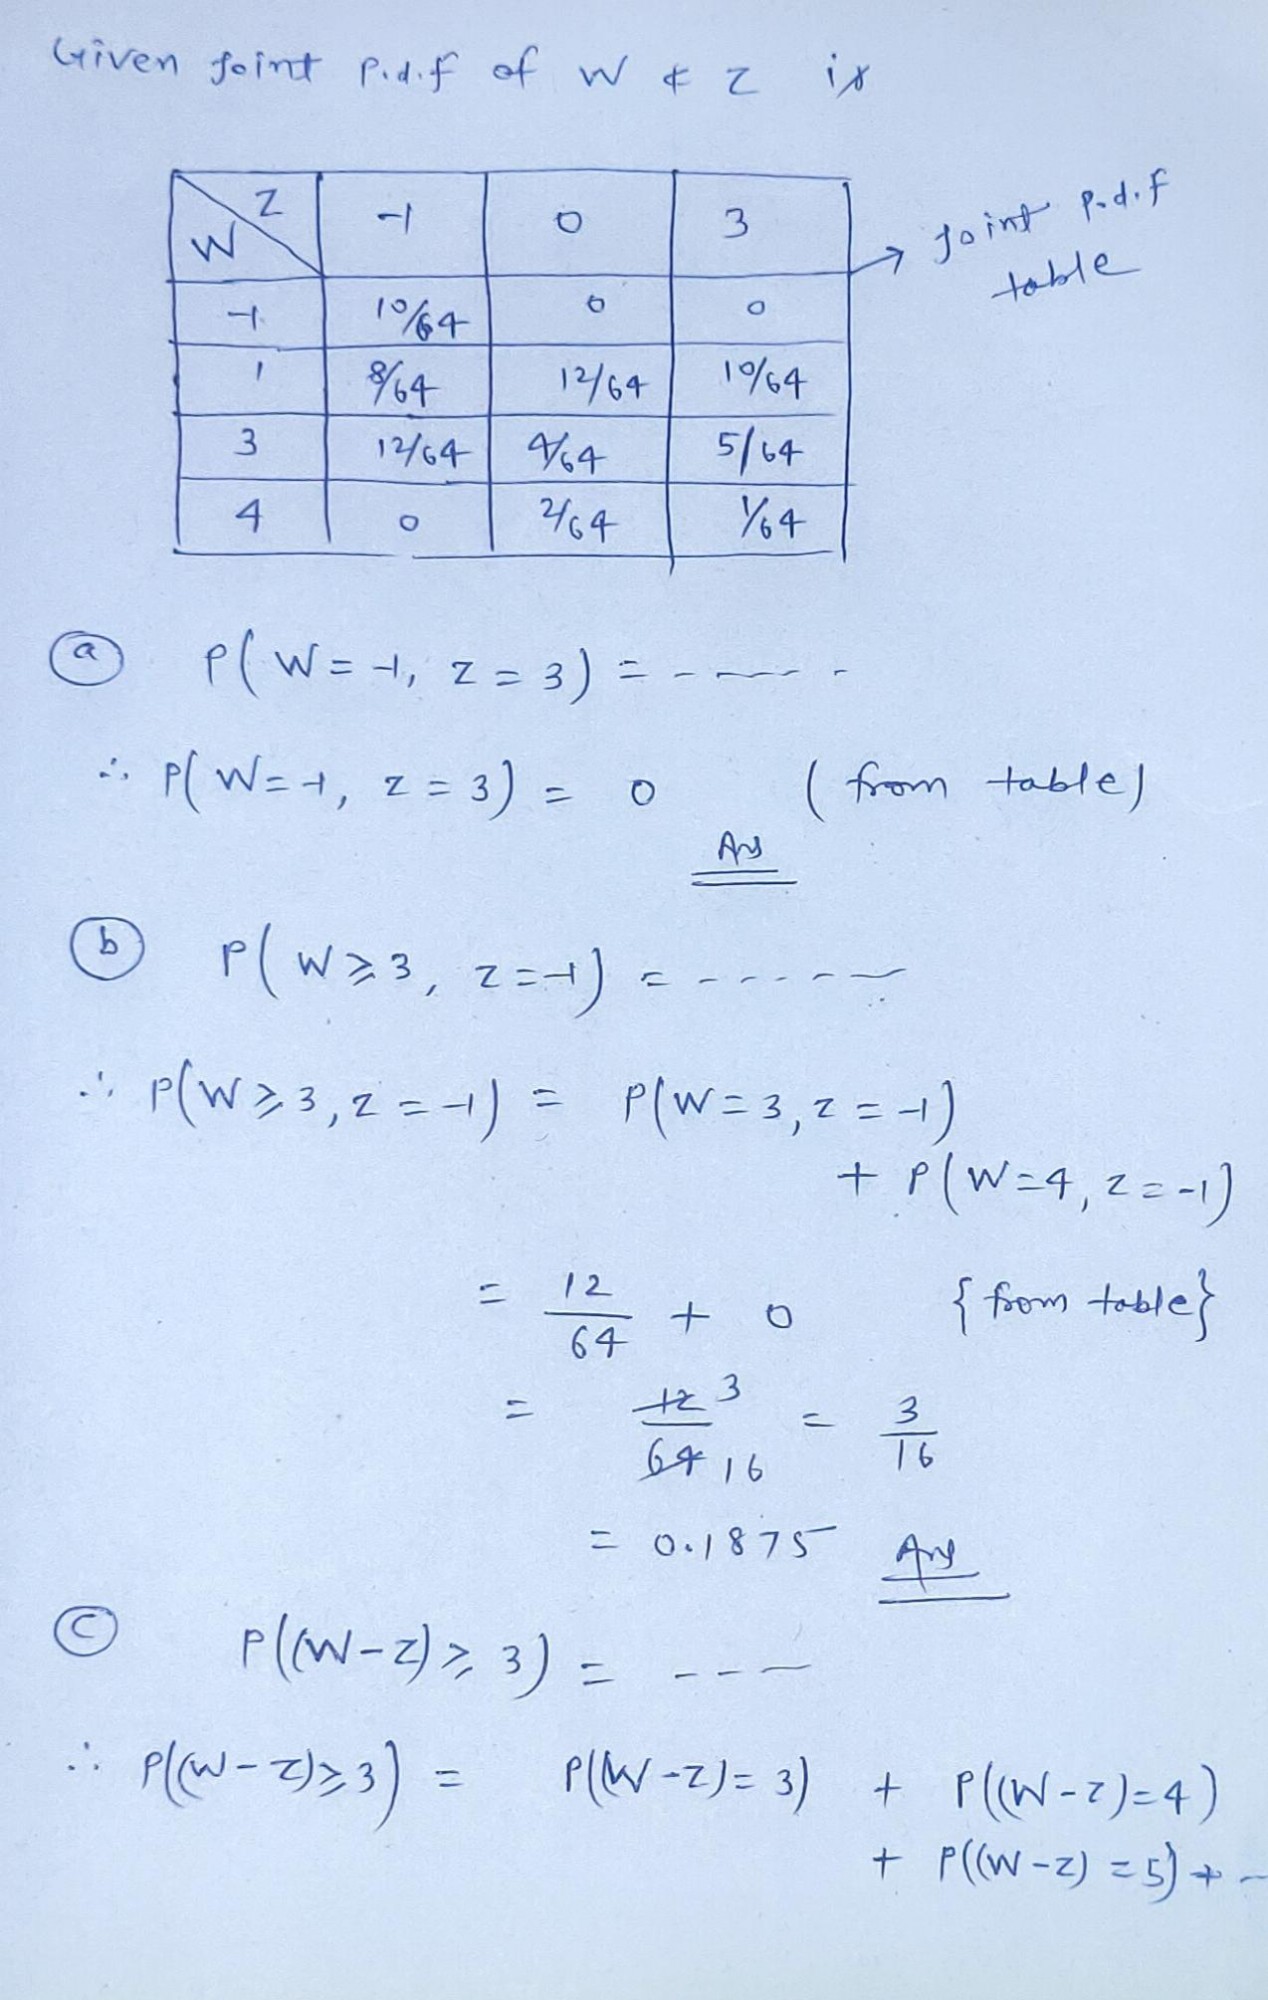 If The Values Of The Joint Probability Distribution Of W And Z 1